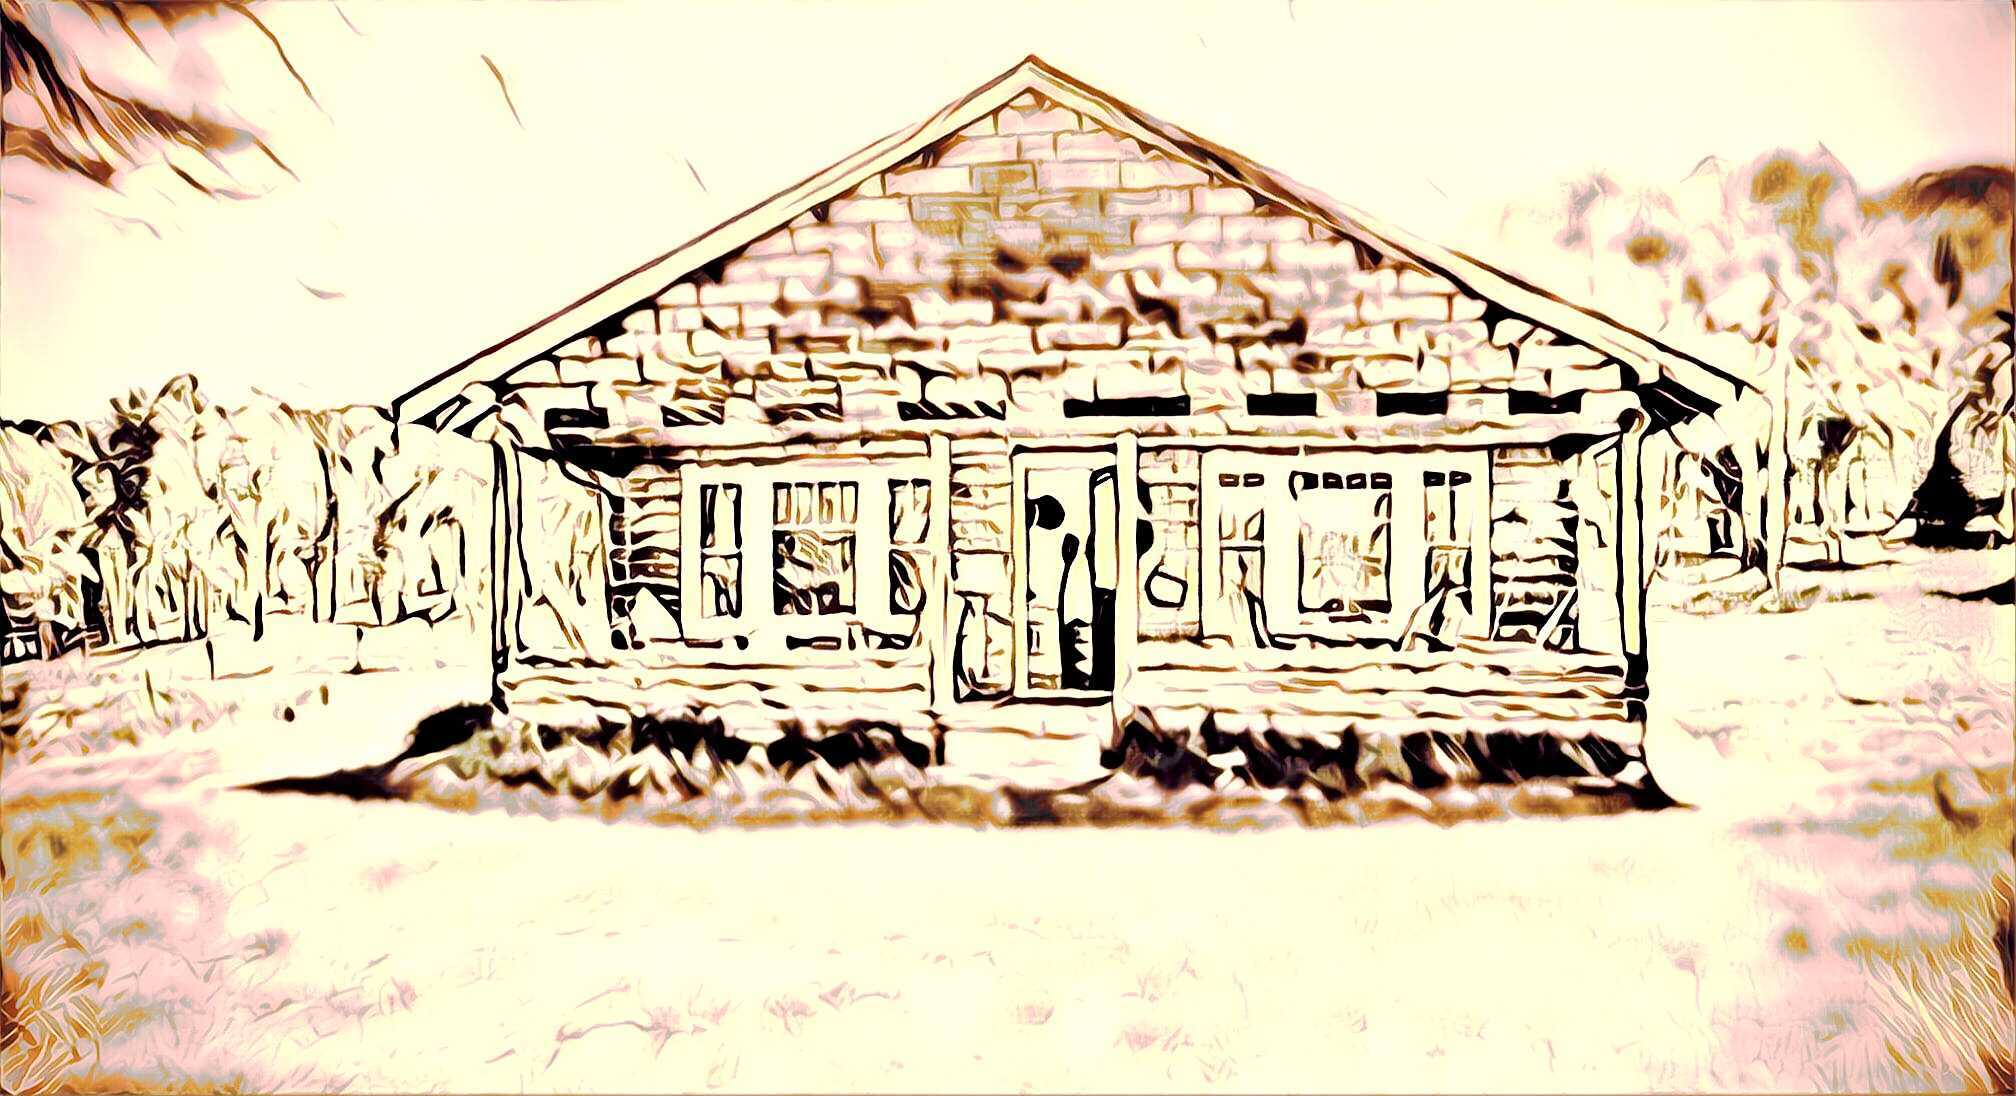 An overexposed artist's rendering of a cabin with a porch